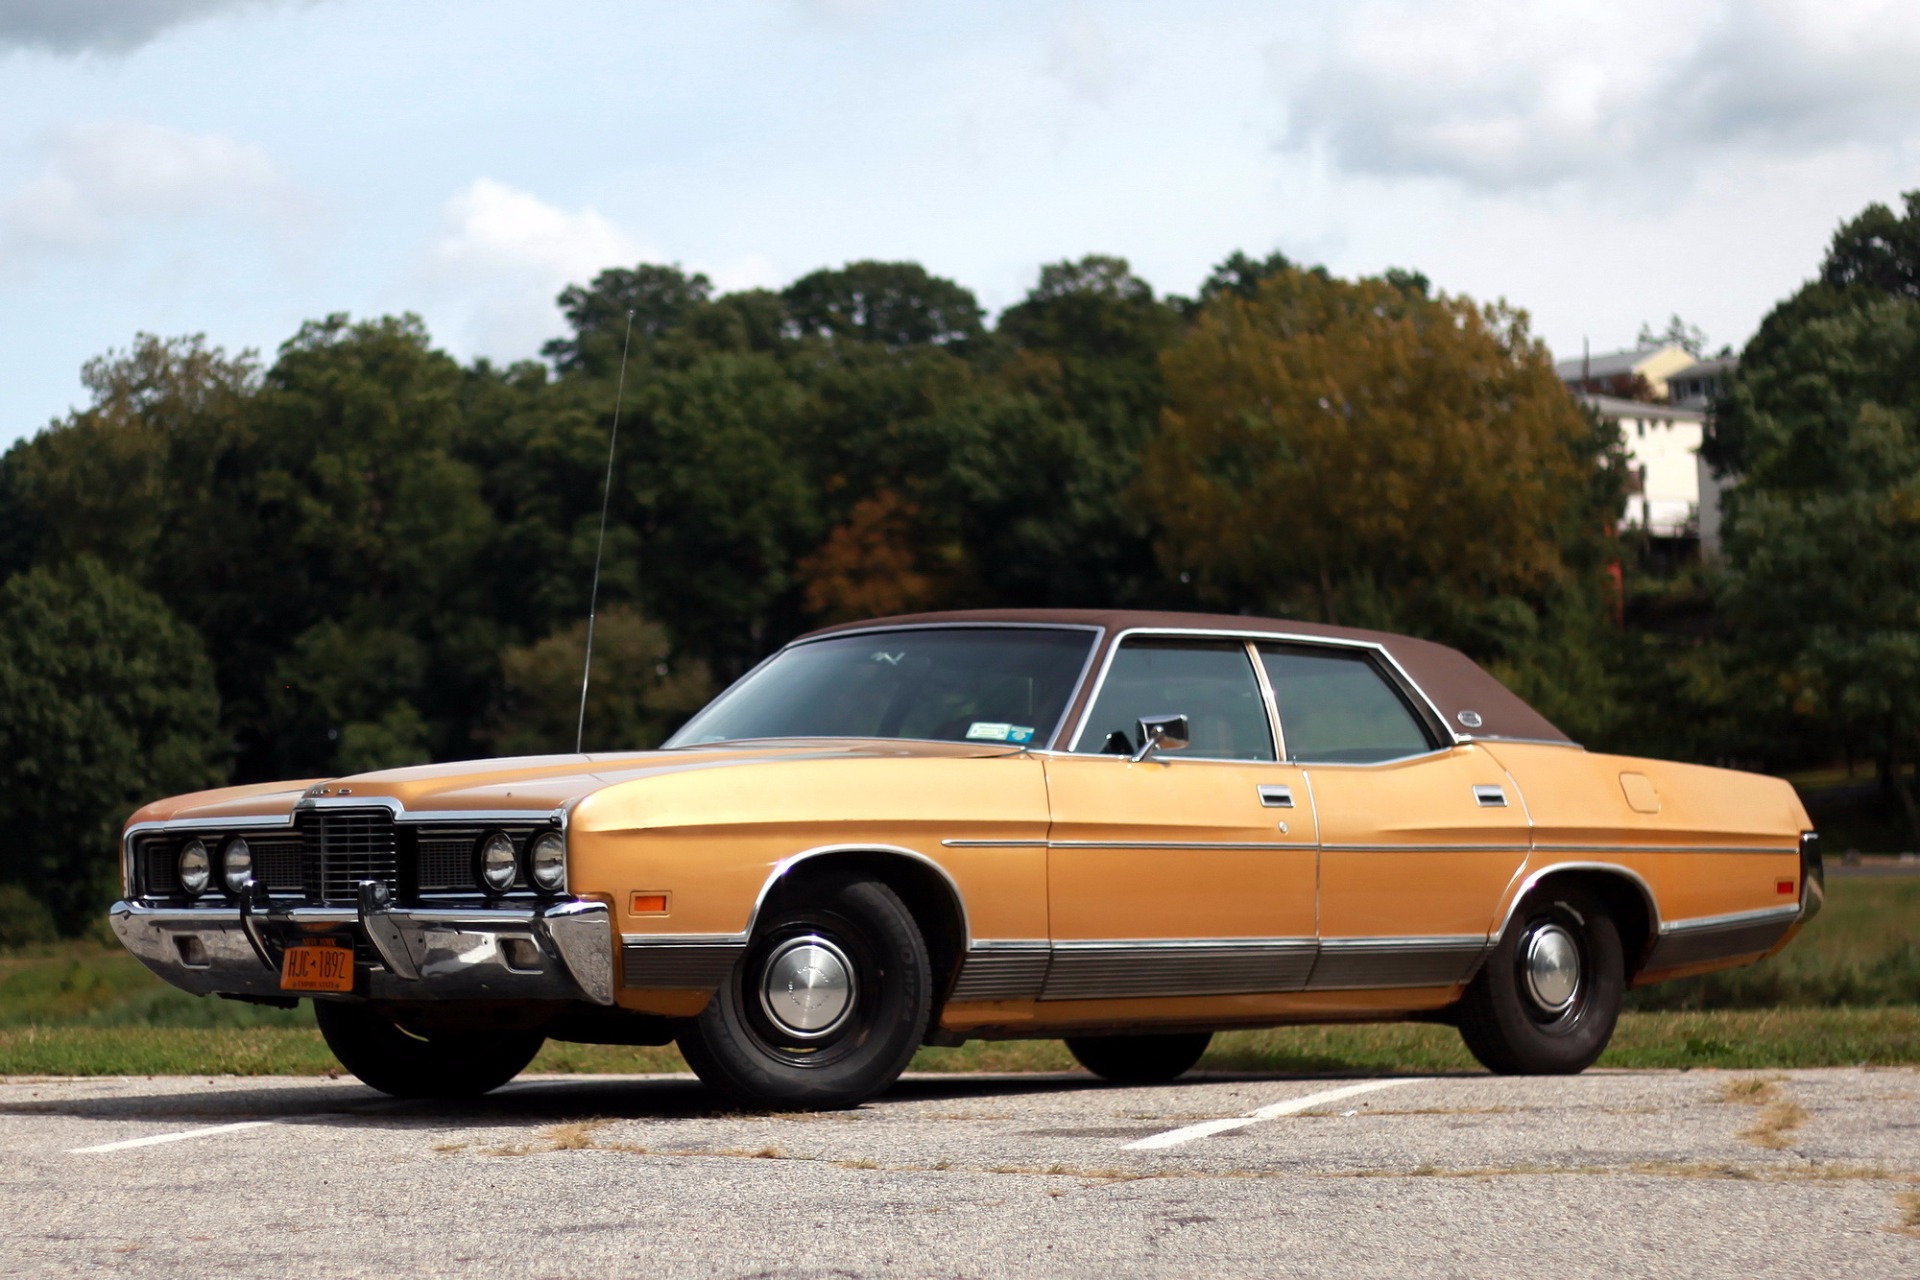 Used-1972-FORD-LTD. Inventory. 